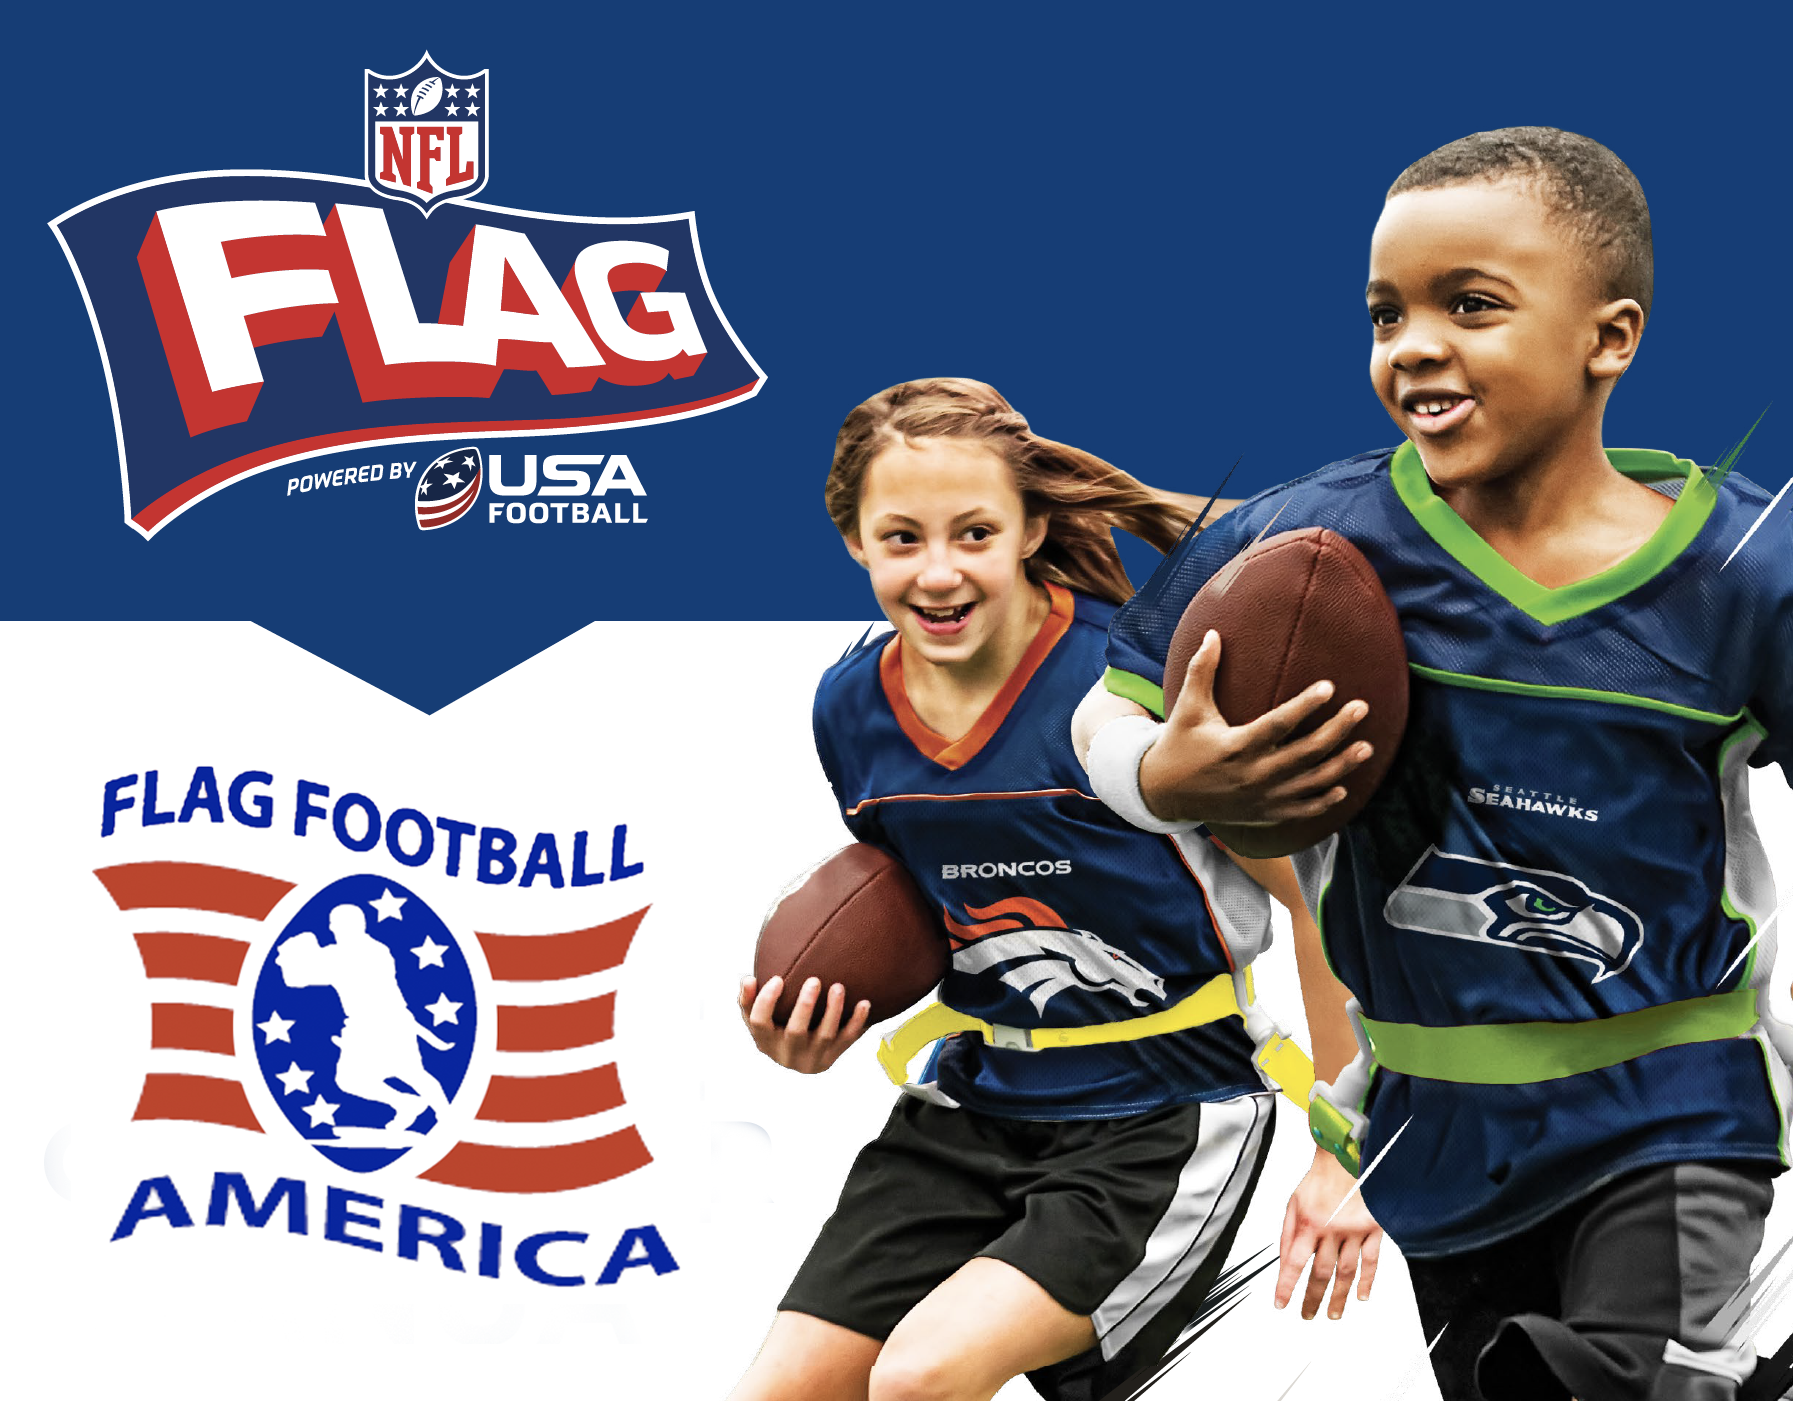 Youth Coed NFL Flag Football League Upper Merion Township